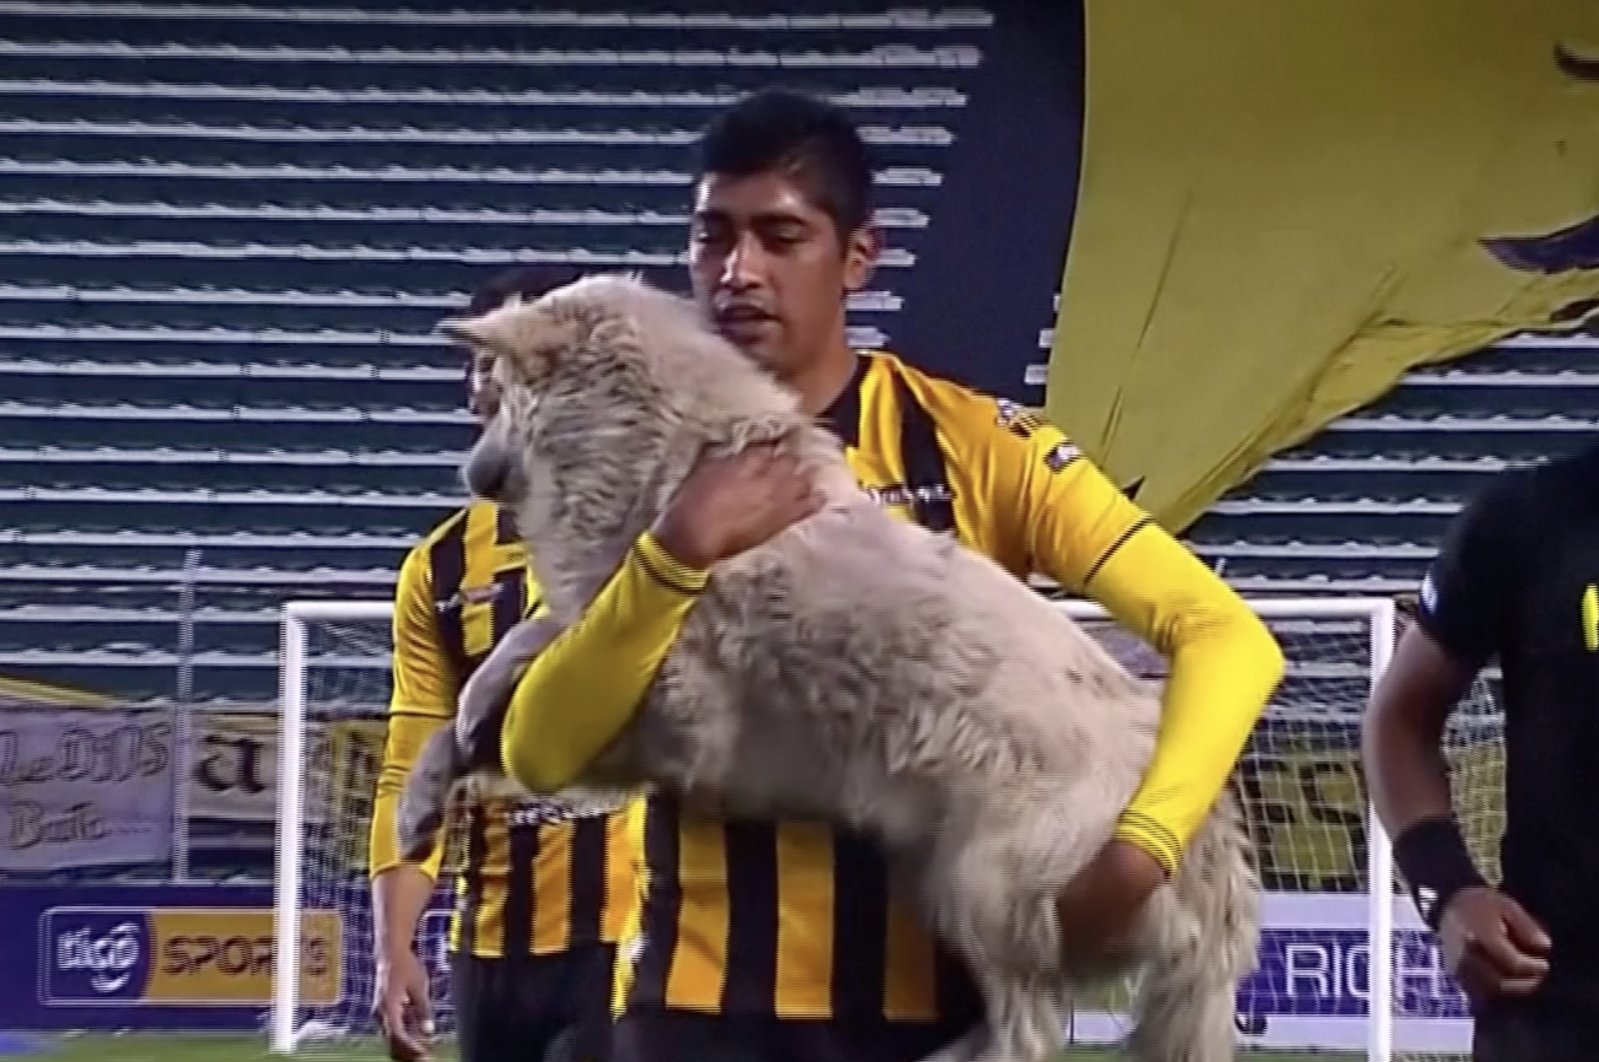 The video grab shows a player carrying a dog who invaded the football pitch, during a football match in Potosi, Bolivia, Dec. 24, 2020.